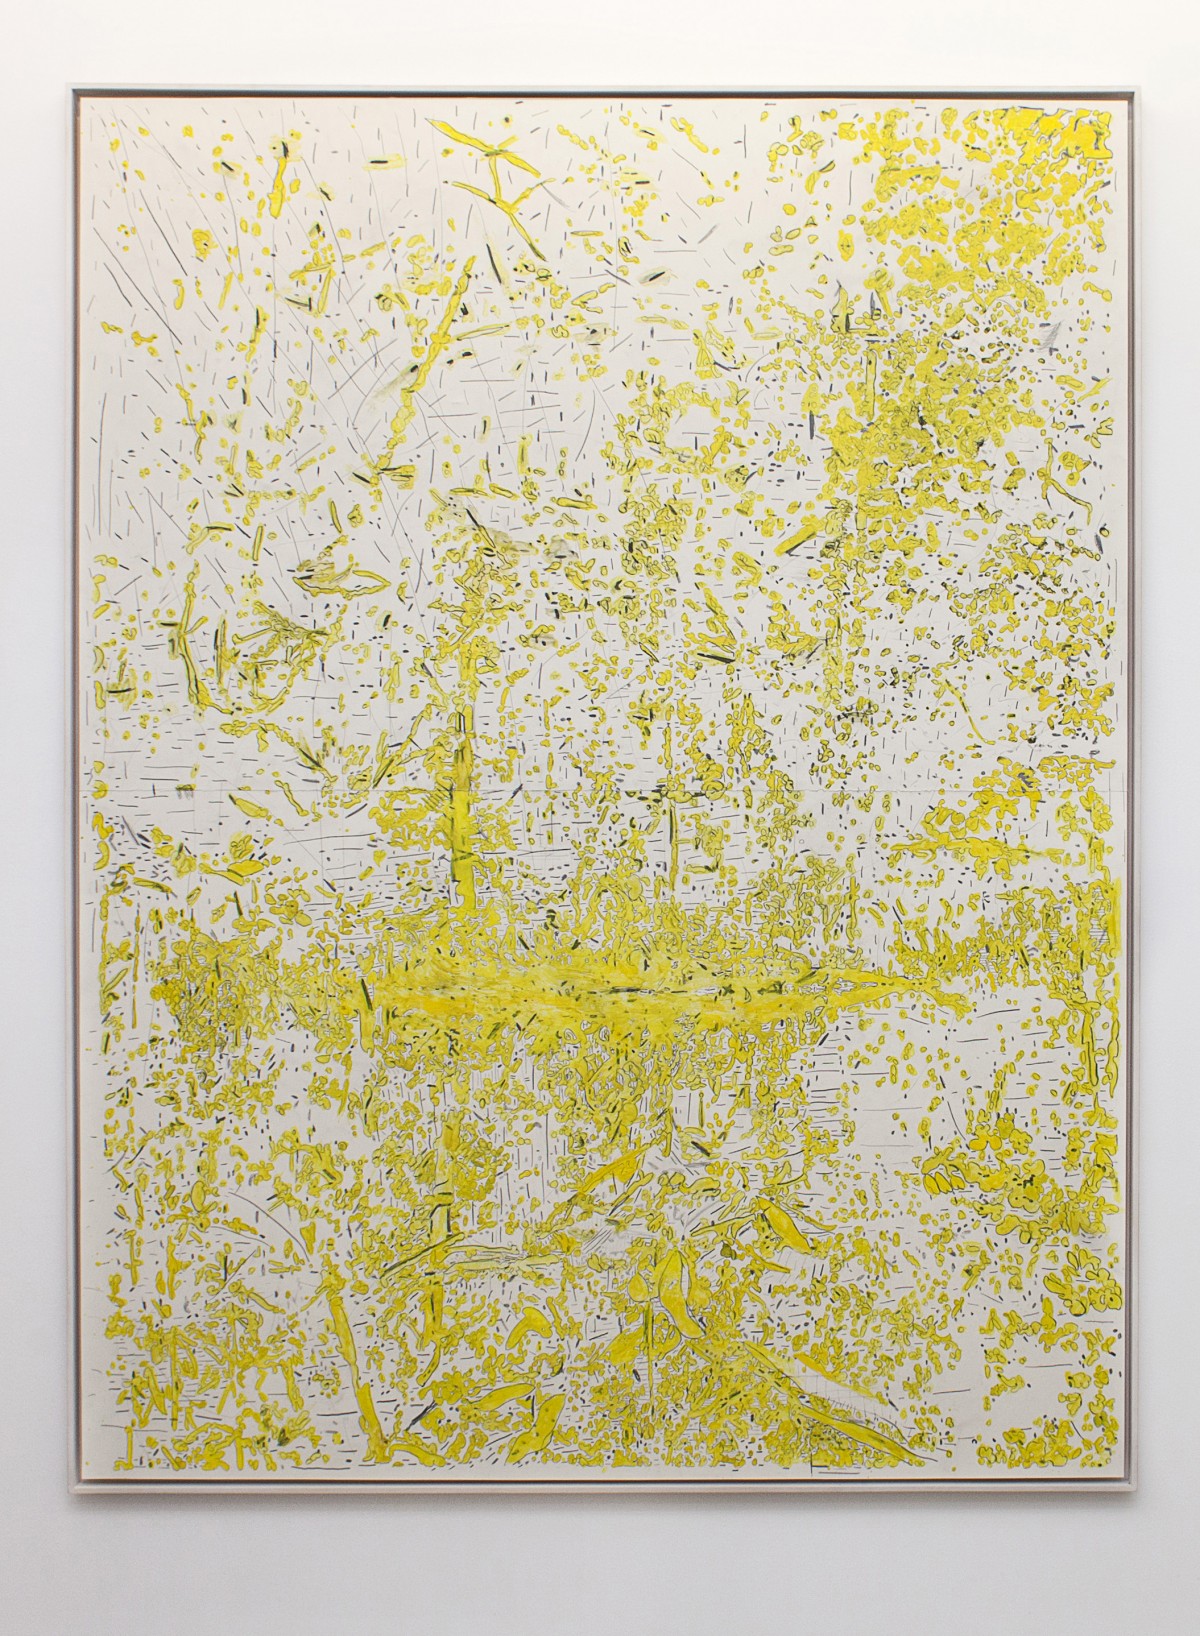 Ania Soliman - Natural Production 6 (Yellow)